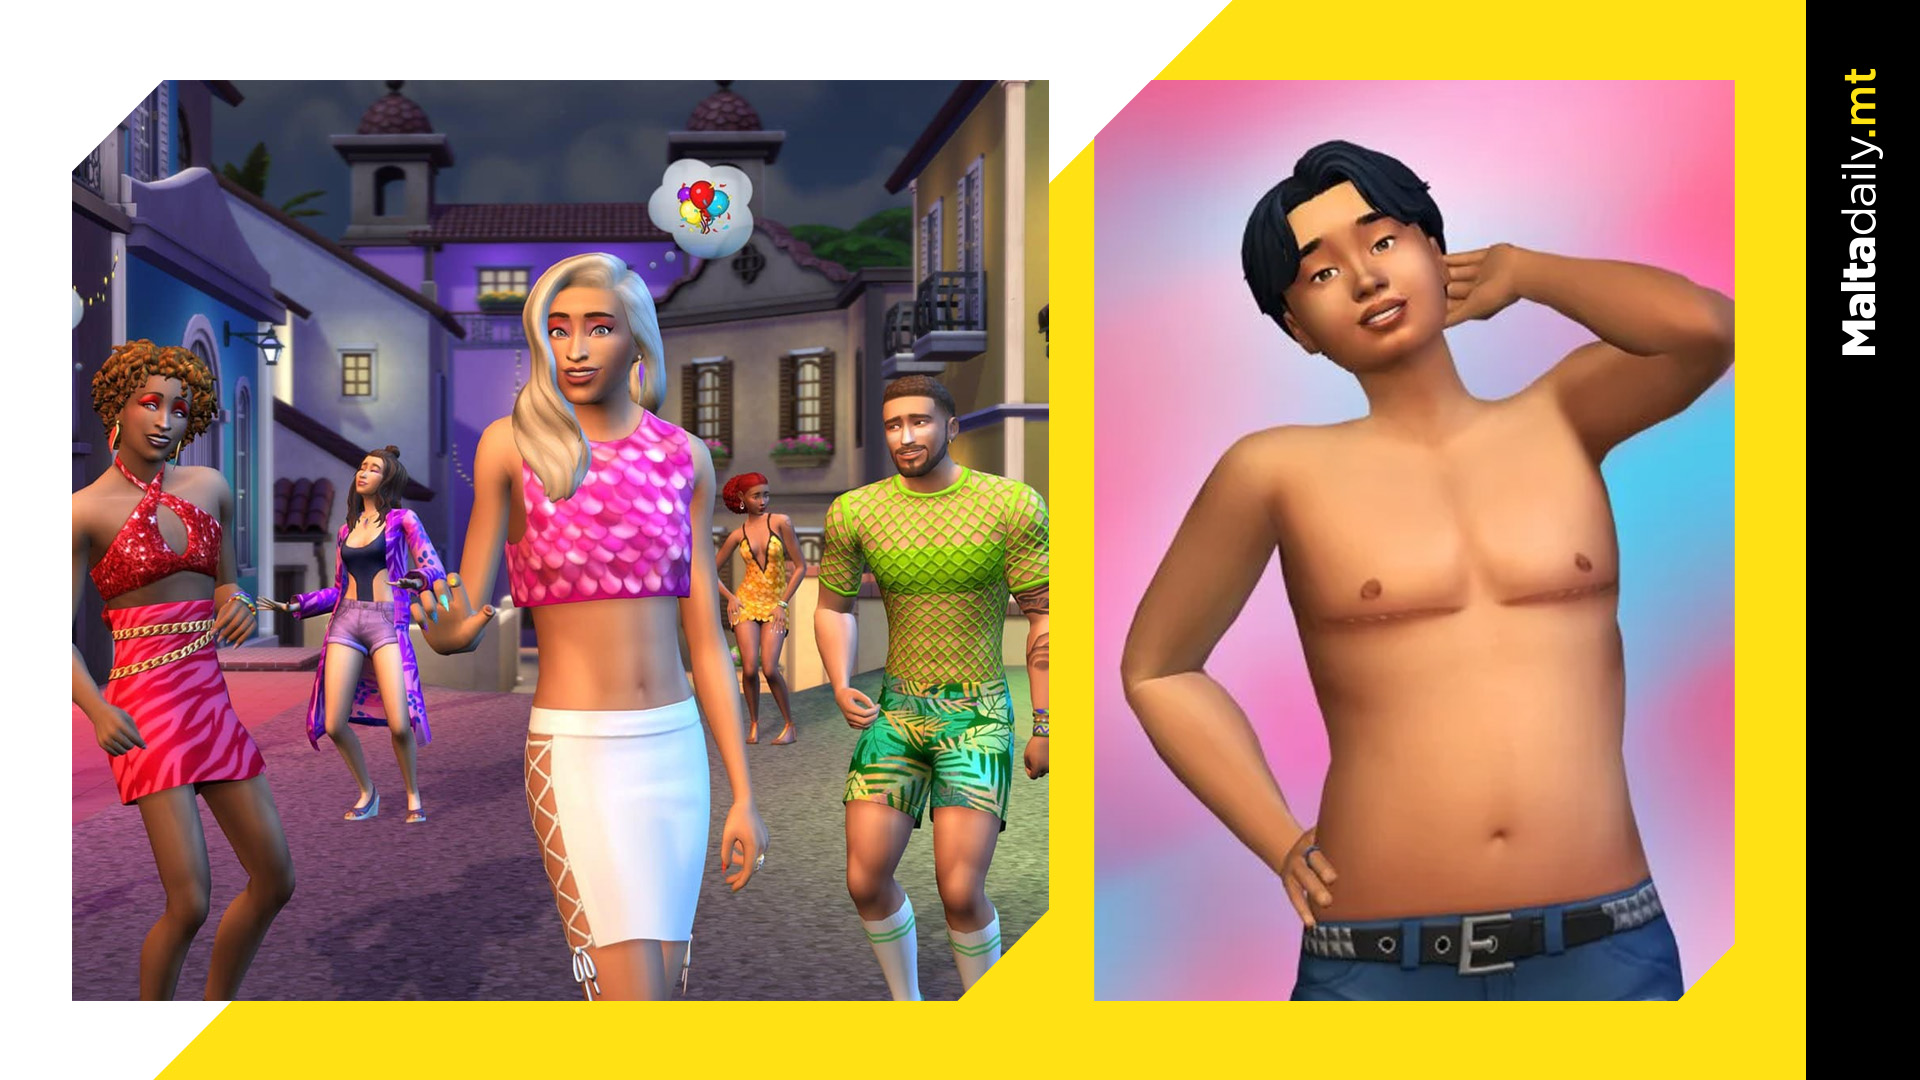 Sims update for trans players praised by LGBTQ gamers